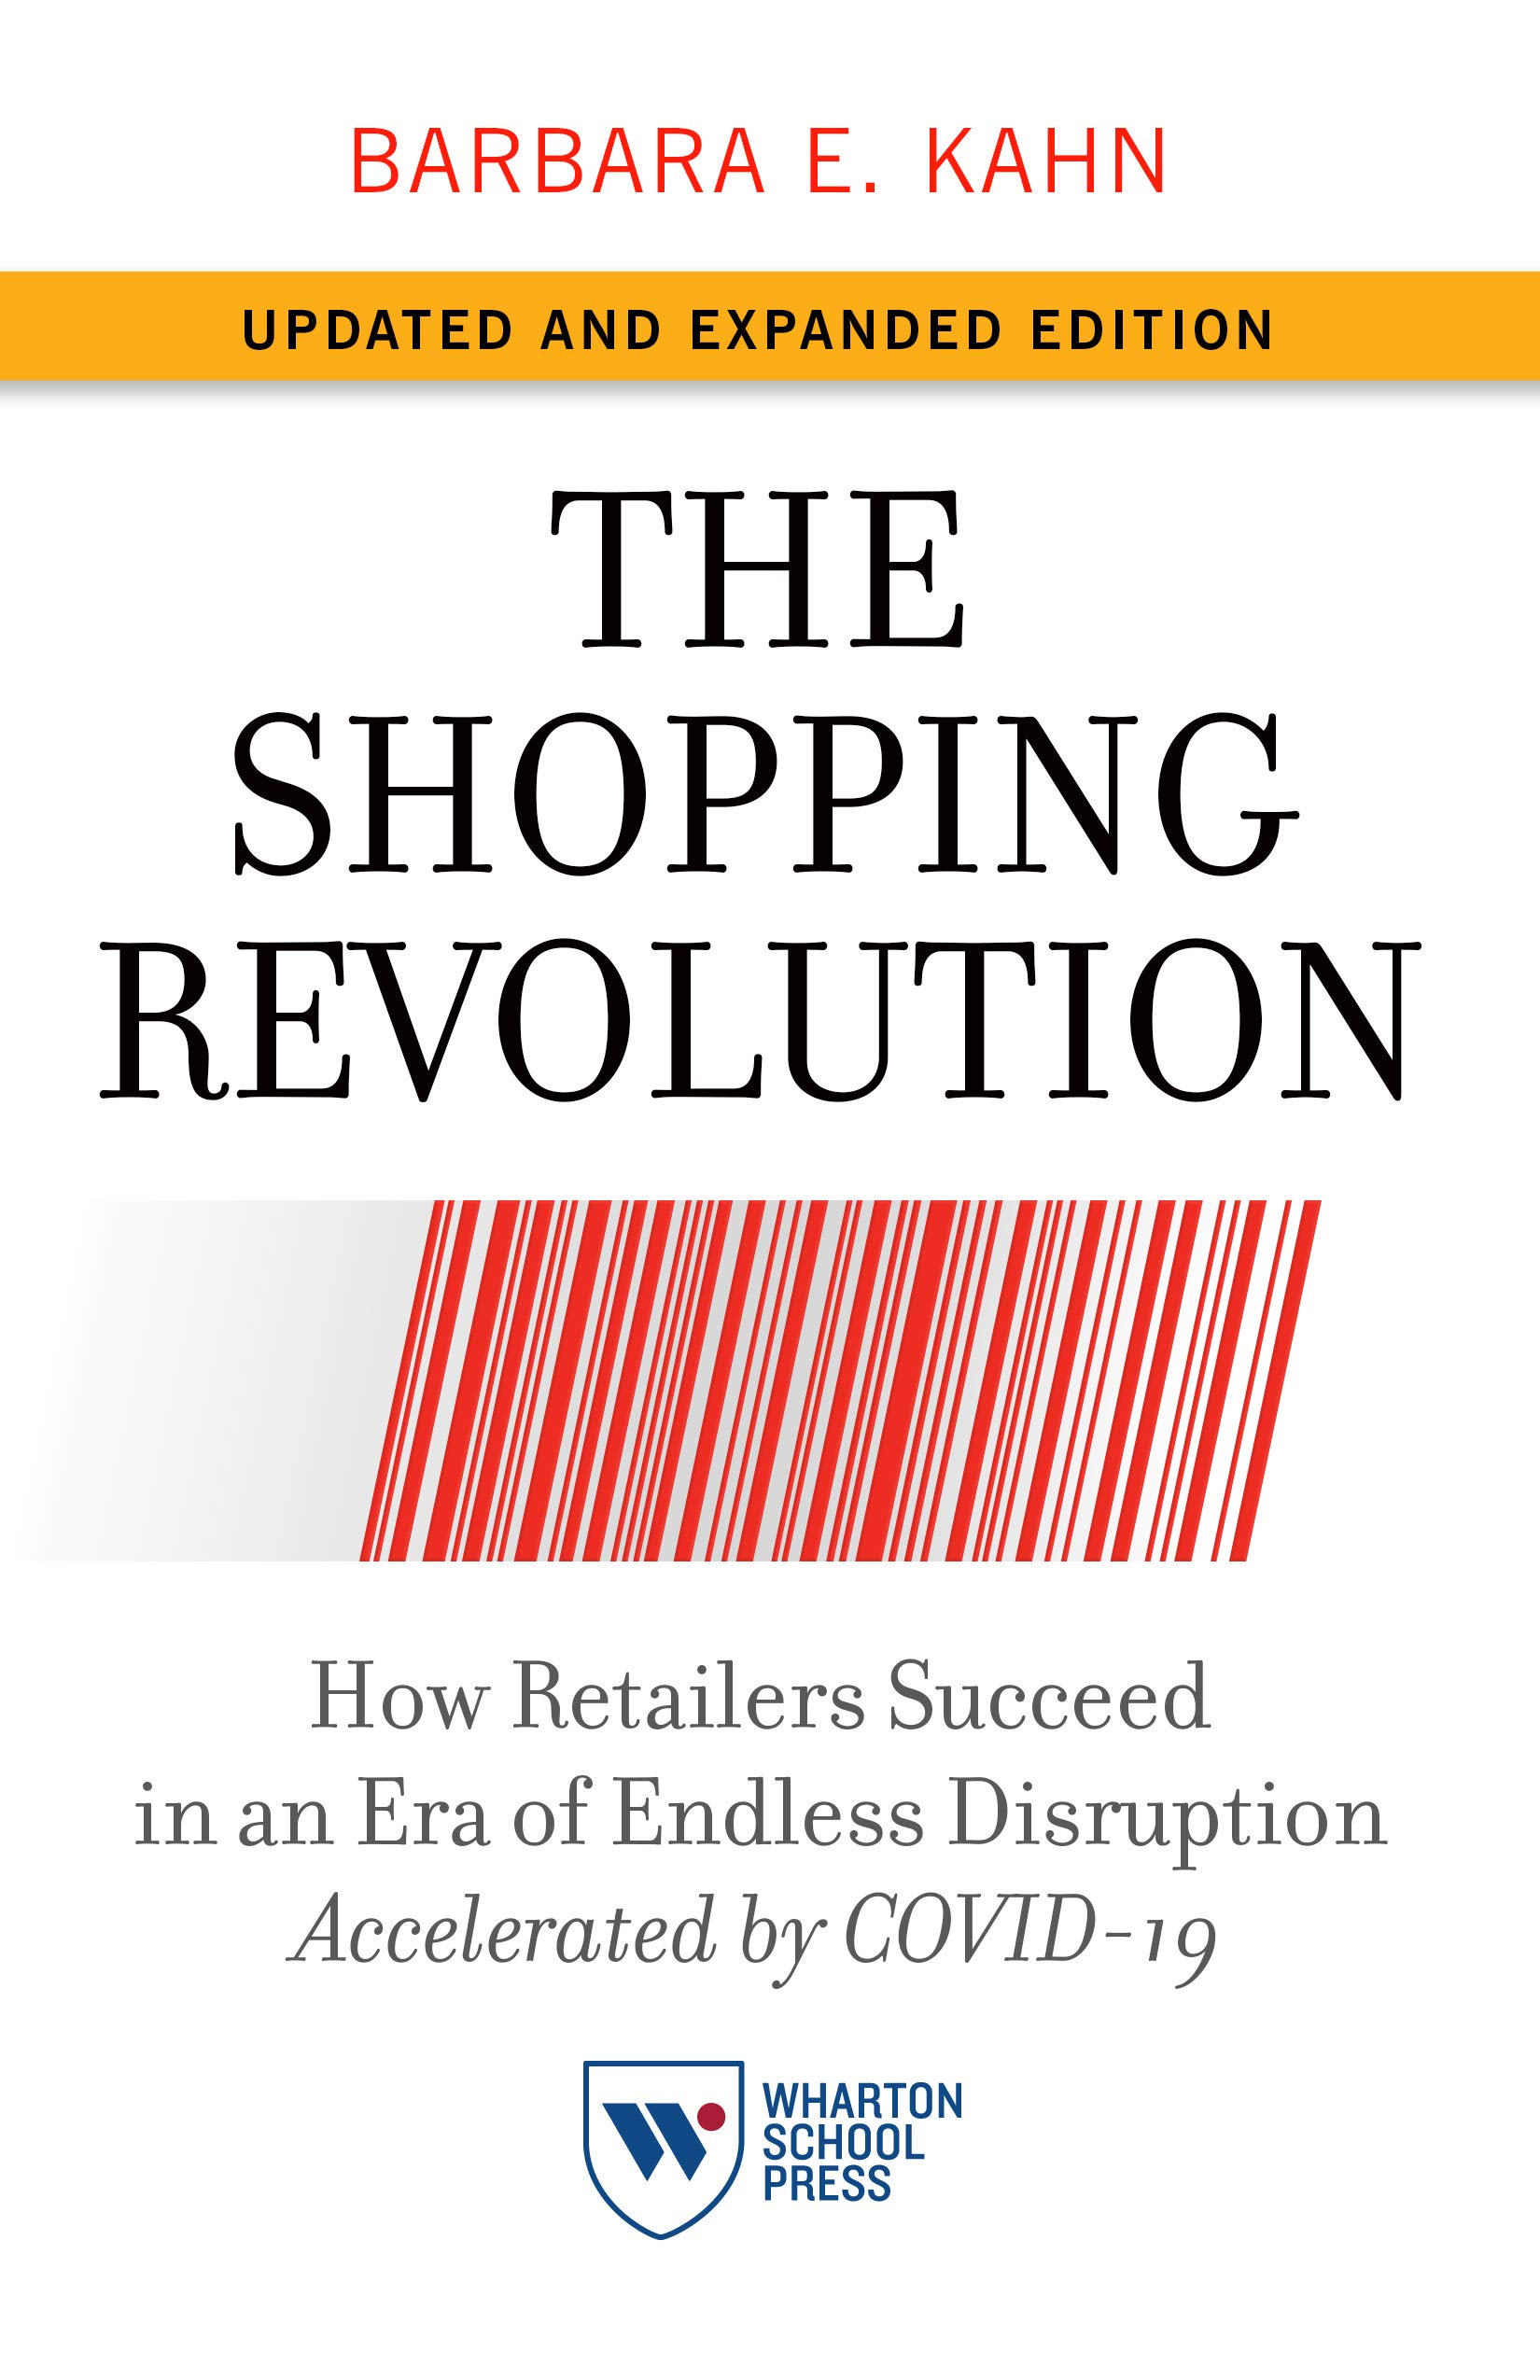 The Shopping Revolution : How Retailers Succeed in an Era of Endless Disruption Accelerated by COVID-19